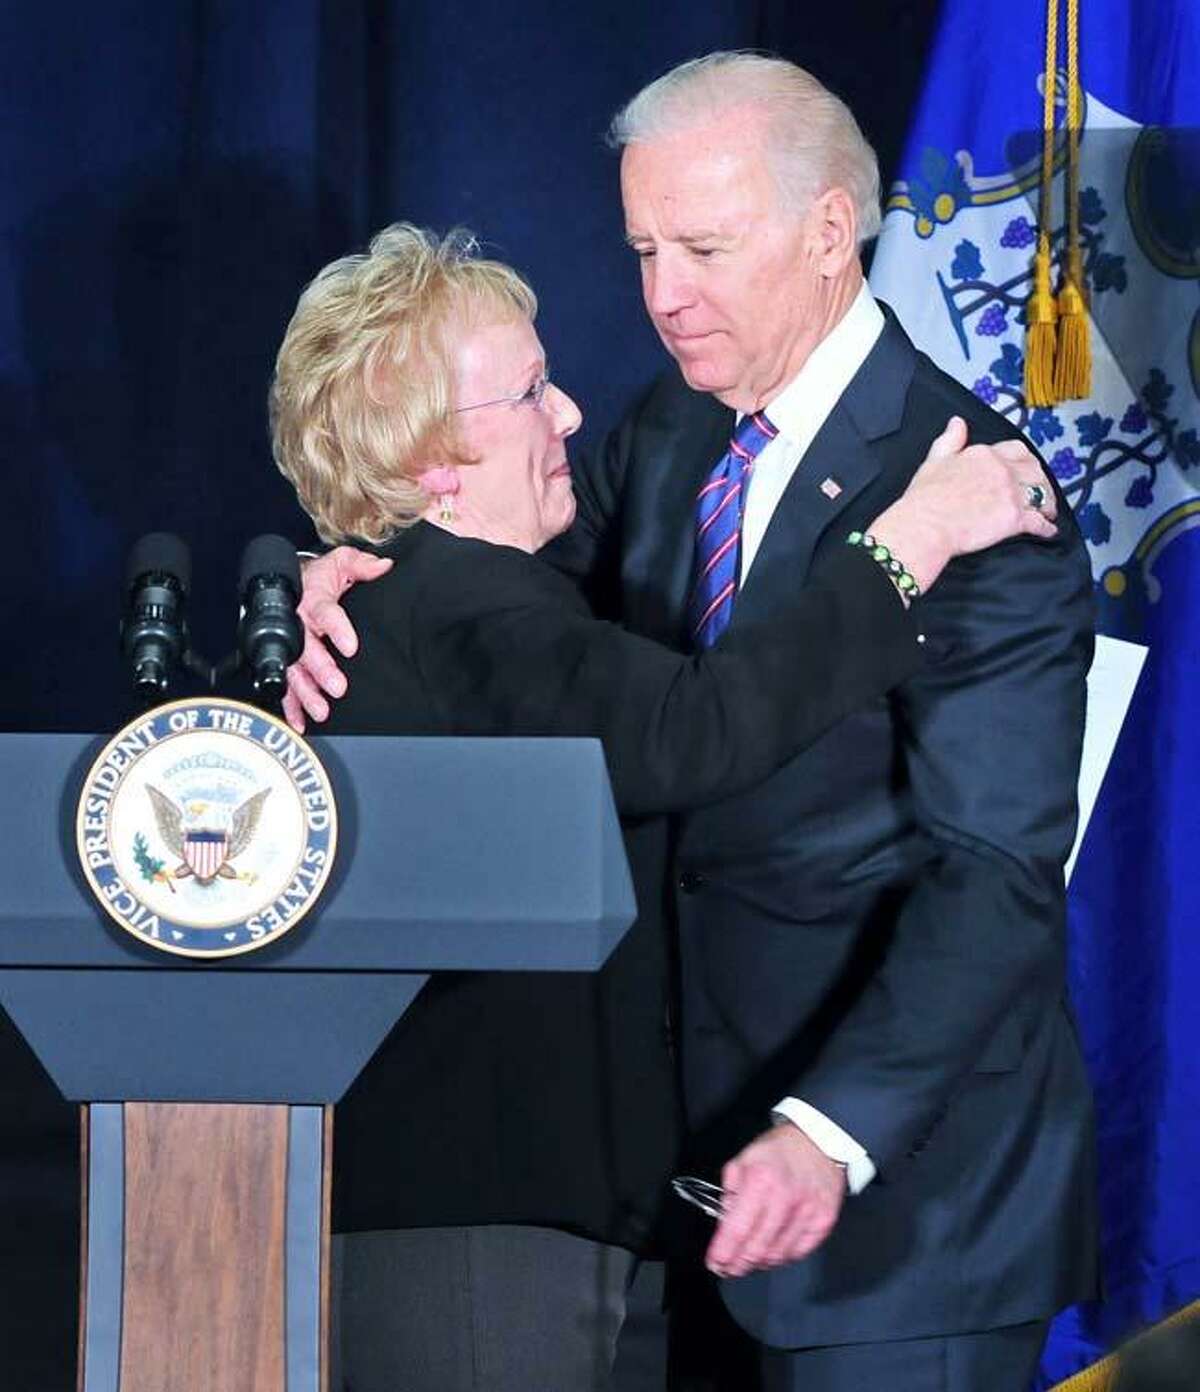 Newtown First Selectman E. Patricia Llodra (left) embraces Vice President Joe Biden (right) before he speaks at a Conference on Gun Violence at the Campus Center Ballroom at Western Connecticut State University in Danbury on 2/21/2013.Photo by Arnold Gold/New Haven Register